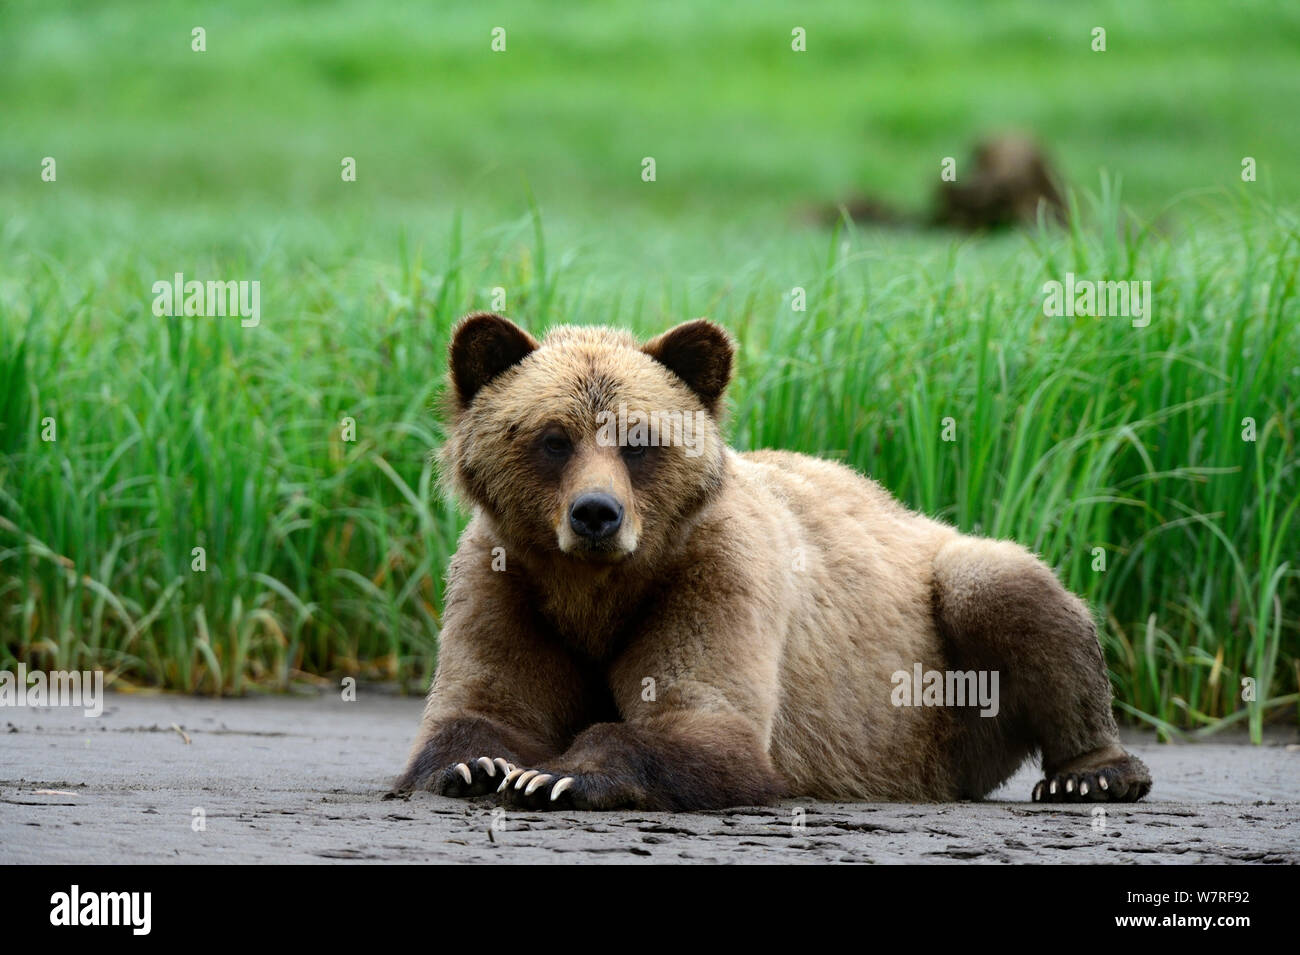 Young female Grizzly bear (Ursus arctos horribilis) resting on the inlet bank at low tide, Khutzeymateen Grizzly Bear Sanctuary, British Columbia, Canada, June. Stock Photo